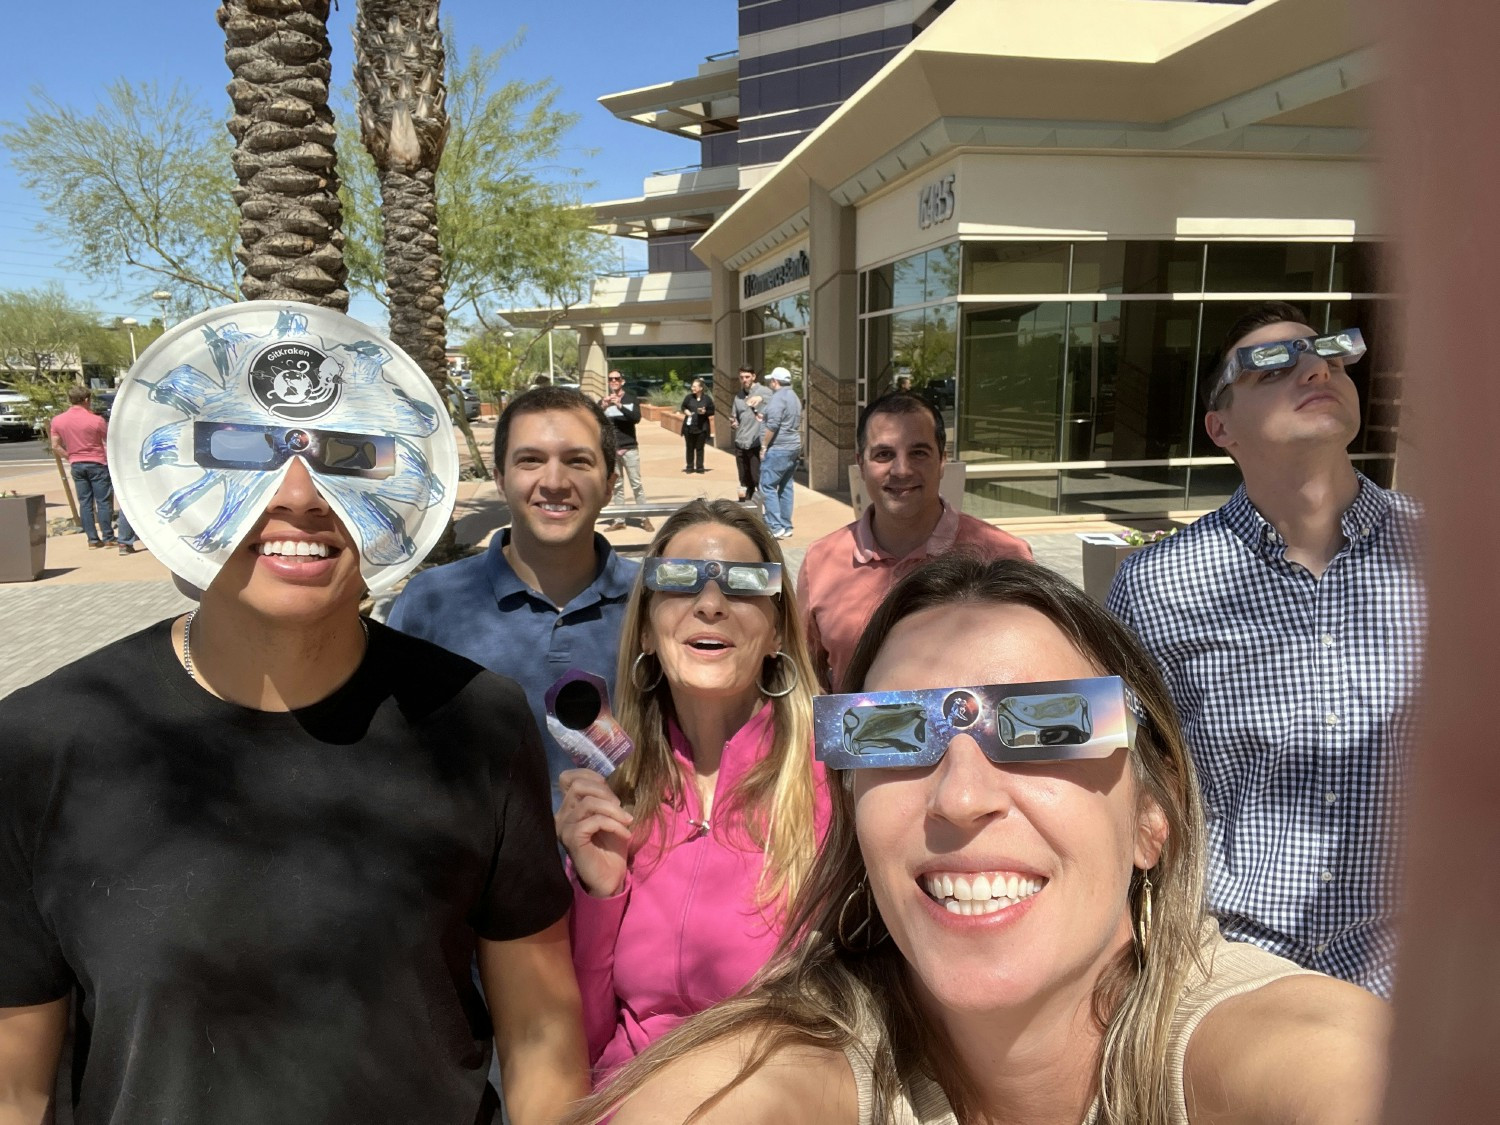 Our Scottsdale crew gearing up for the Eclipse watch party 